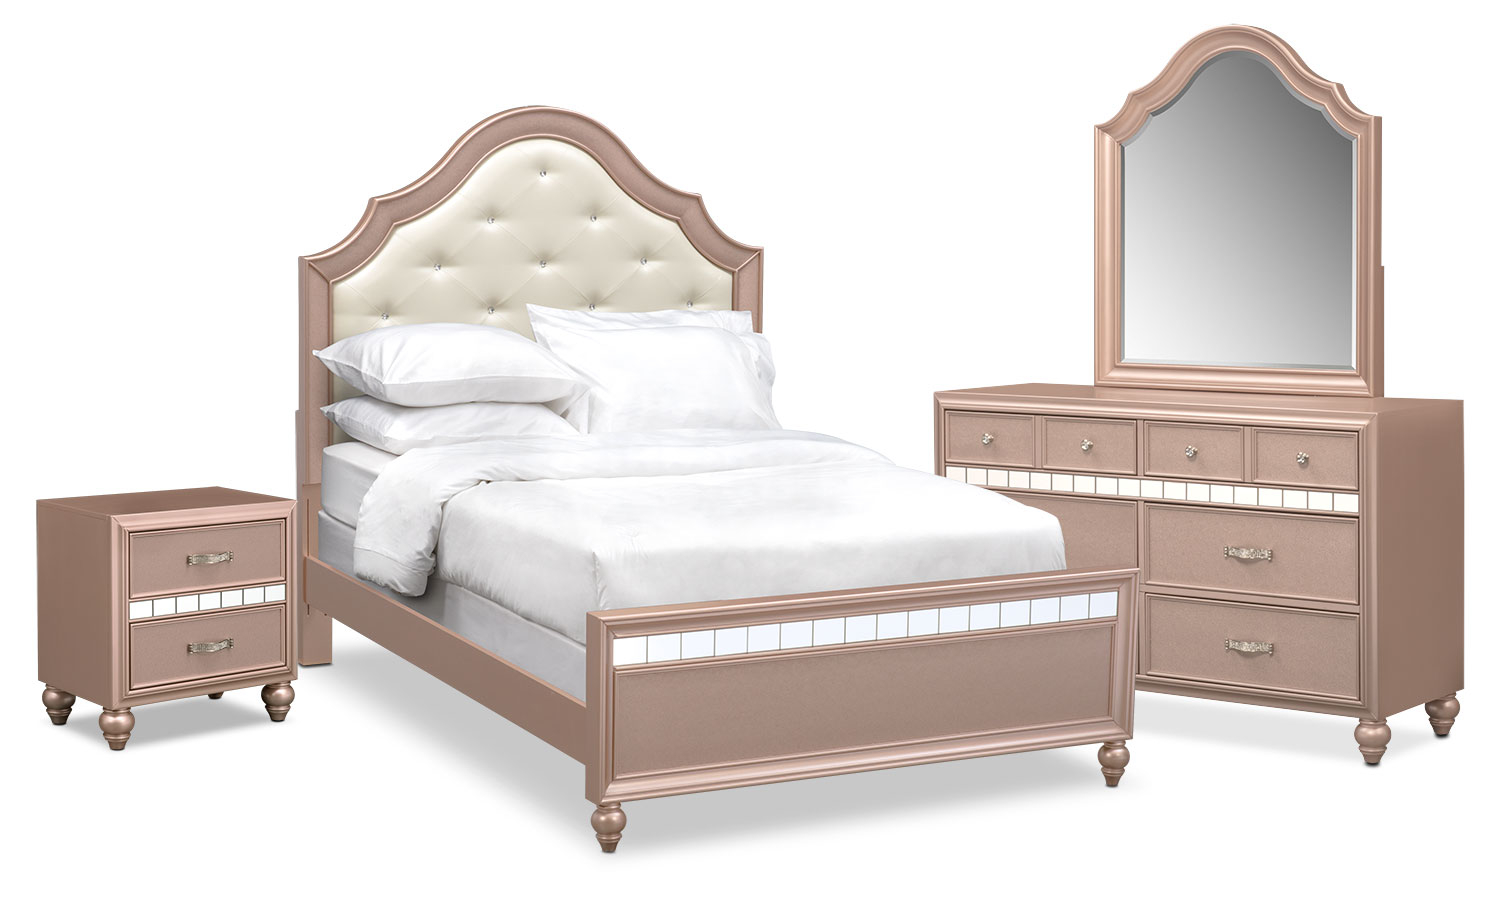 Serena Youth 6 Piece Bedroom Set With Nightstand Dresser And Mirror within dimensions 1500 X 921